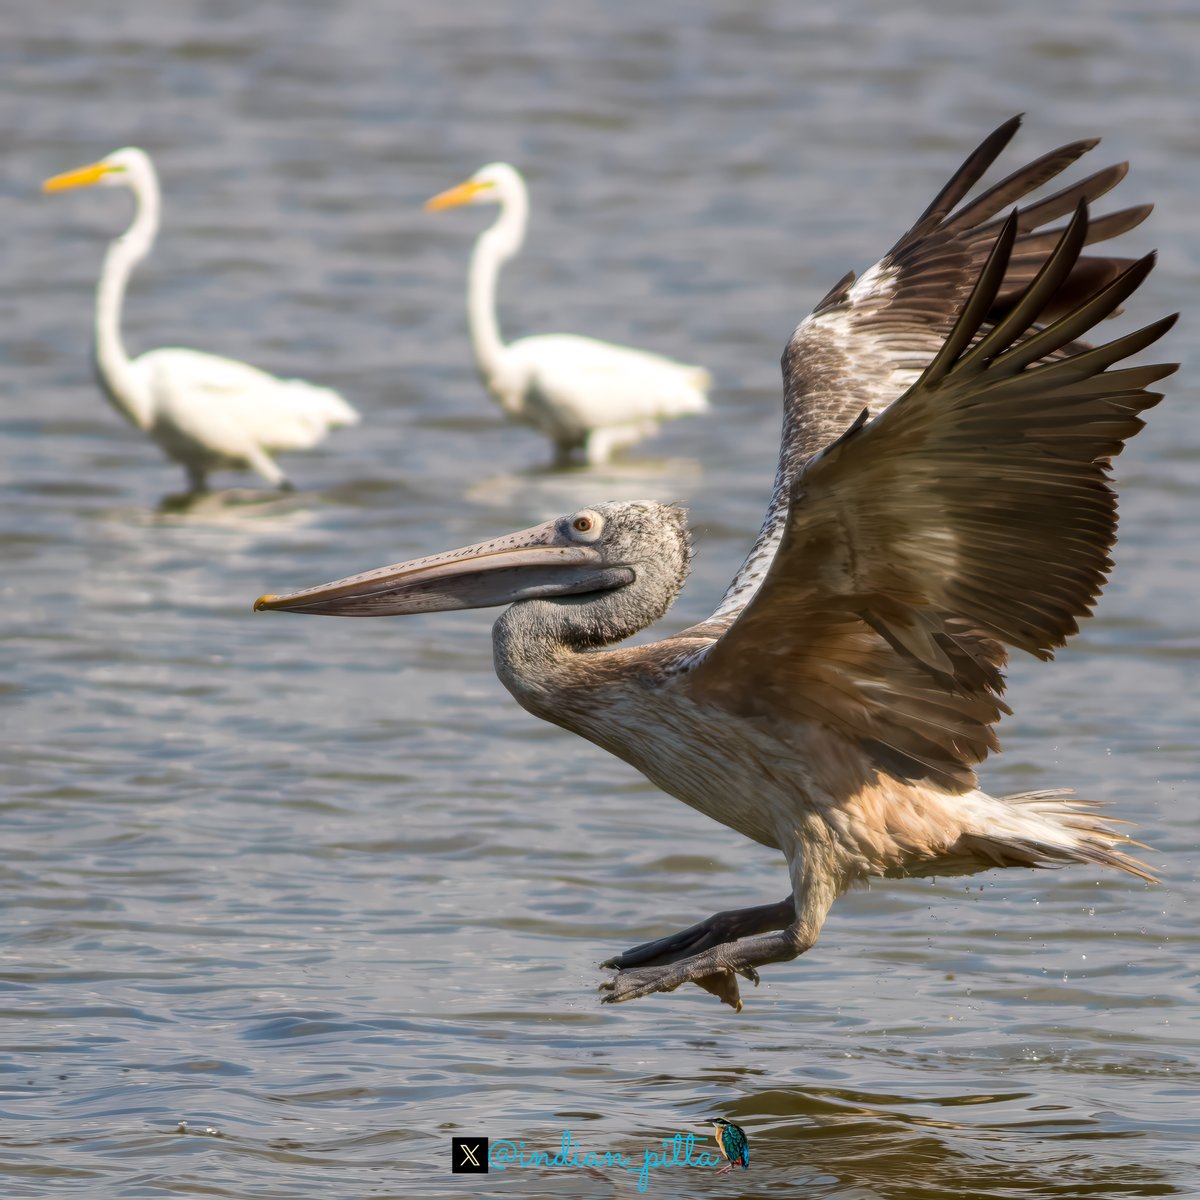 Show some of your best landing shots Here is Spot-billed pelican with landing gears on.